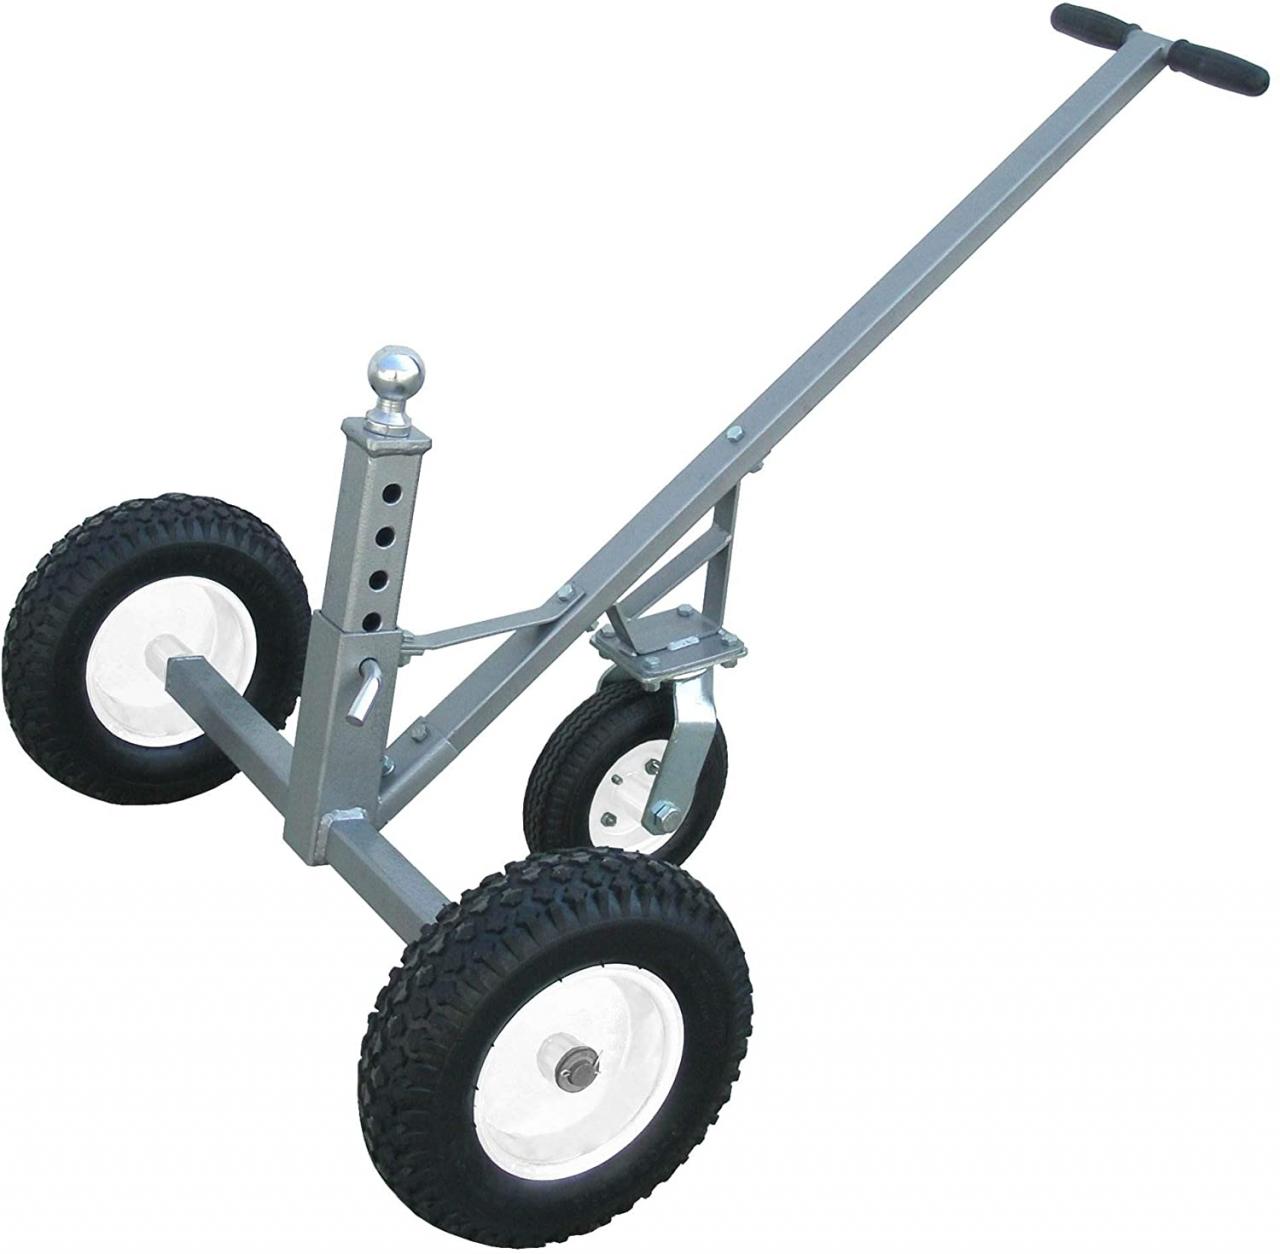 Adjustable Electric Trailer Dolly OWNER'S MANUAL